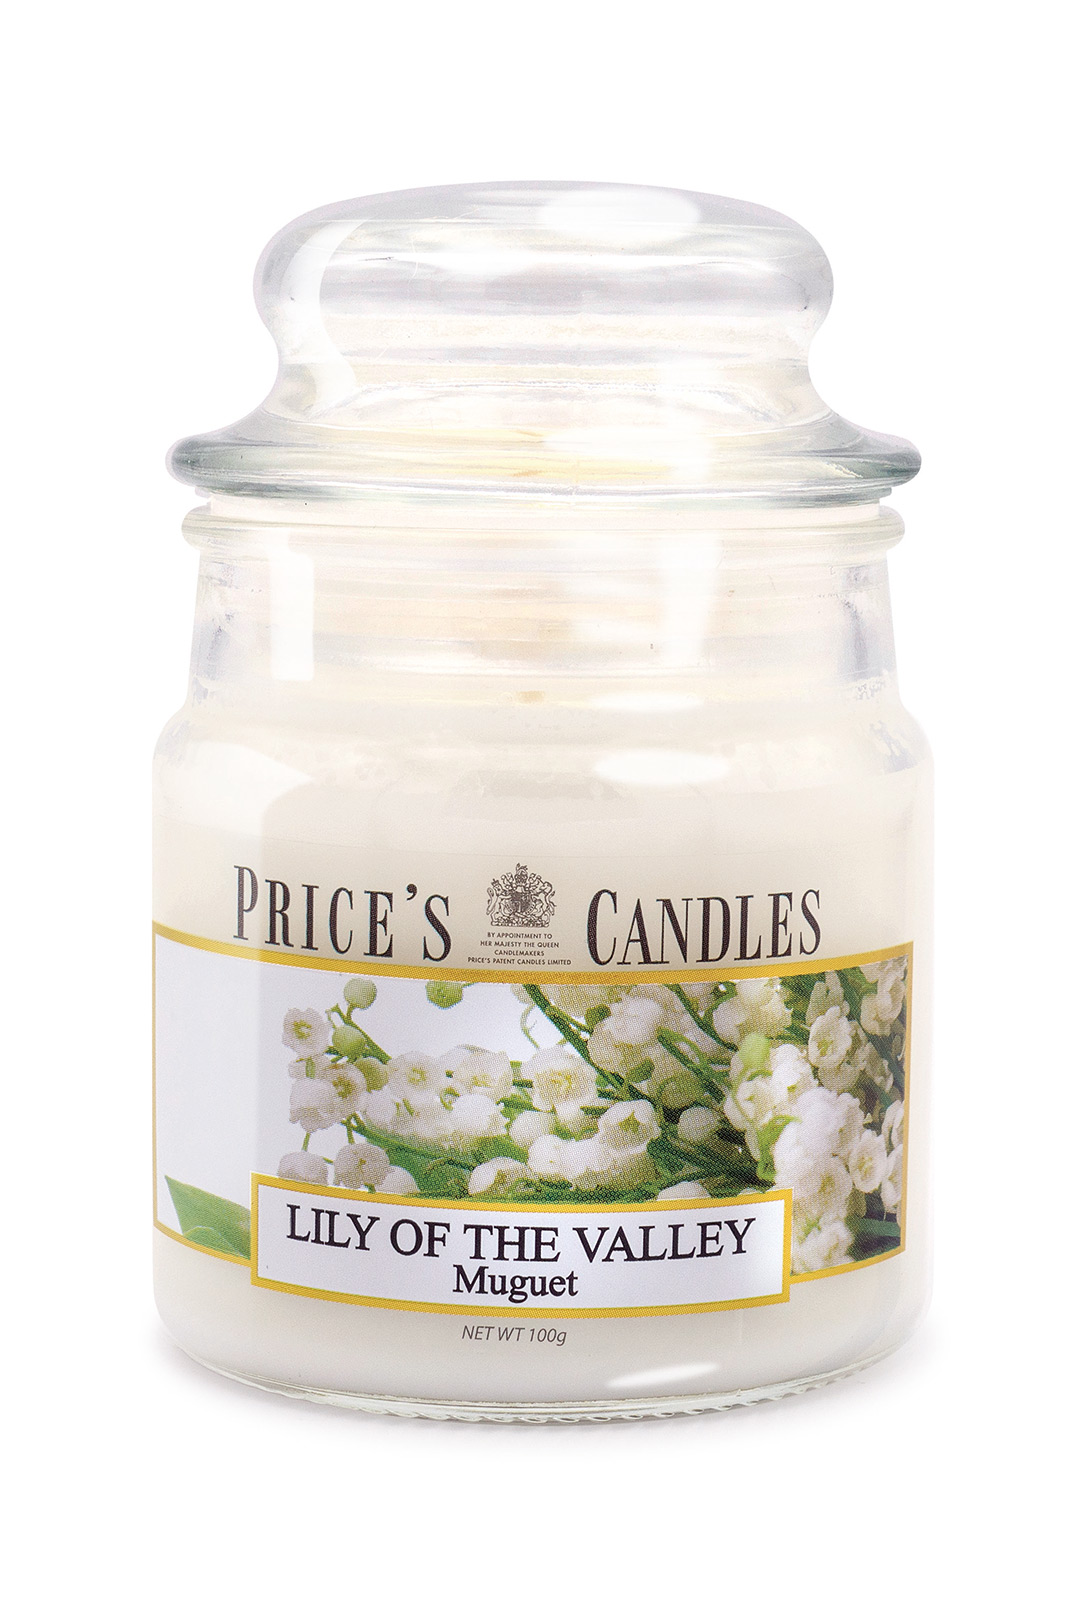 Prices Candle "Lily of the Valley" 100g 